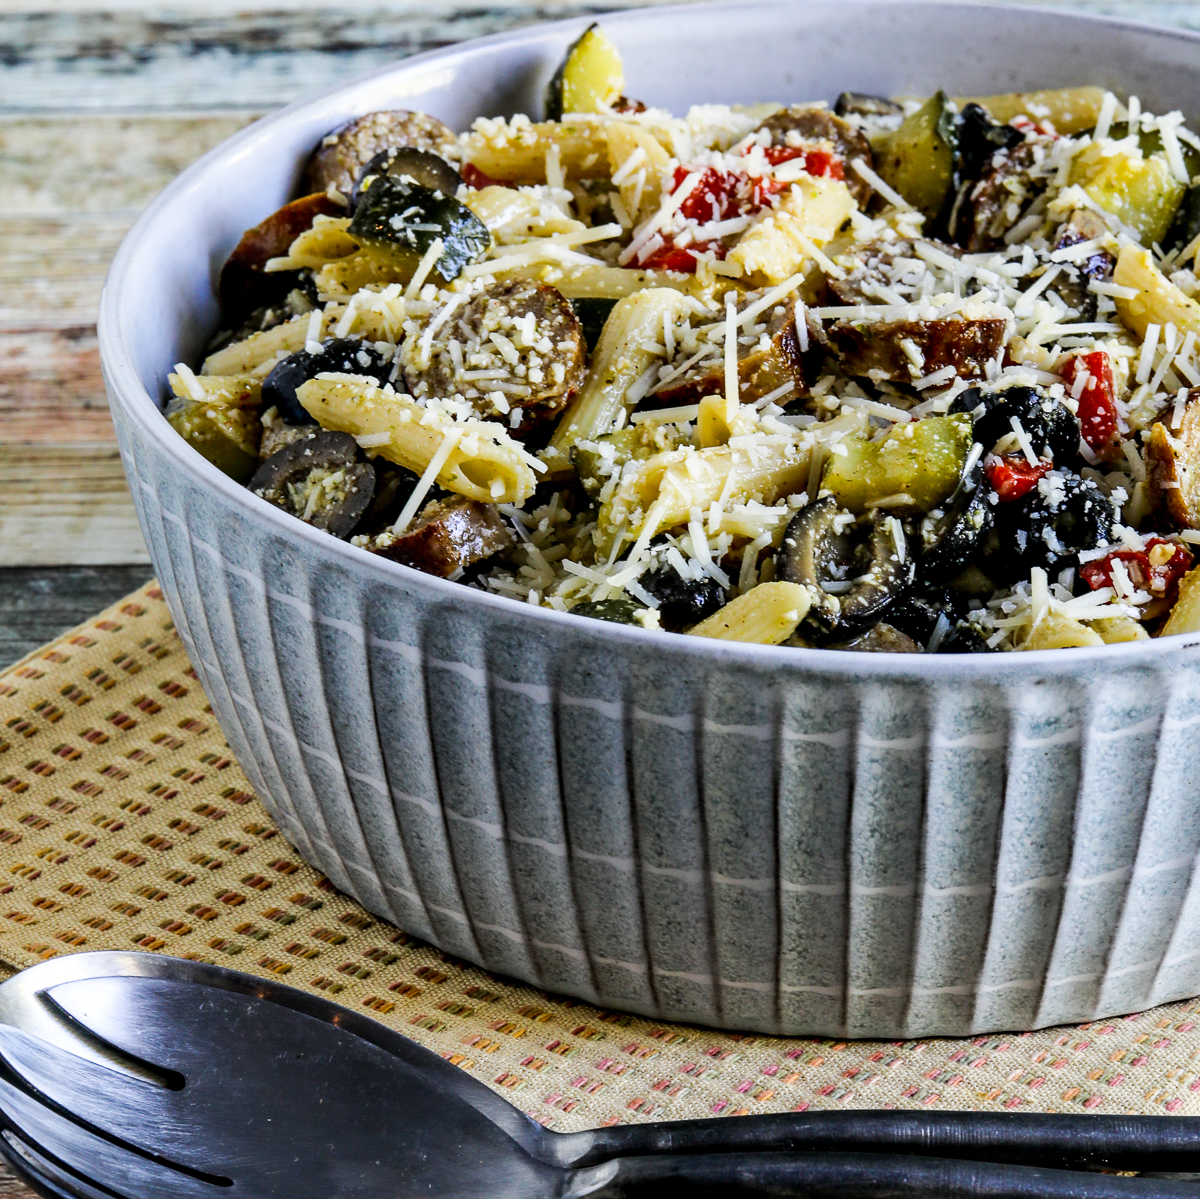 Pasta Salad with Sausage, Zucchini, Olives, and Peppers in serving bowl with forks and napkin